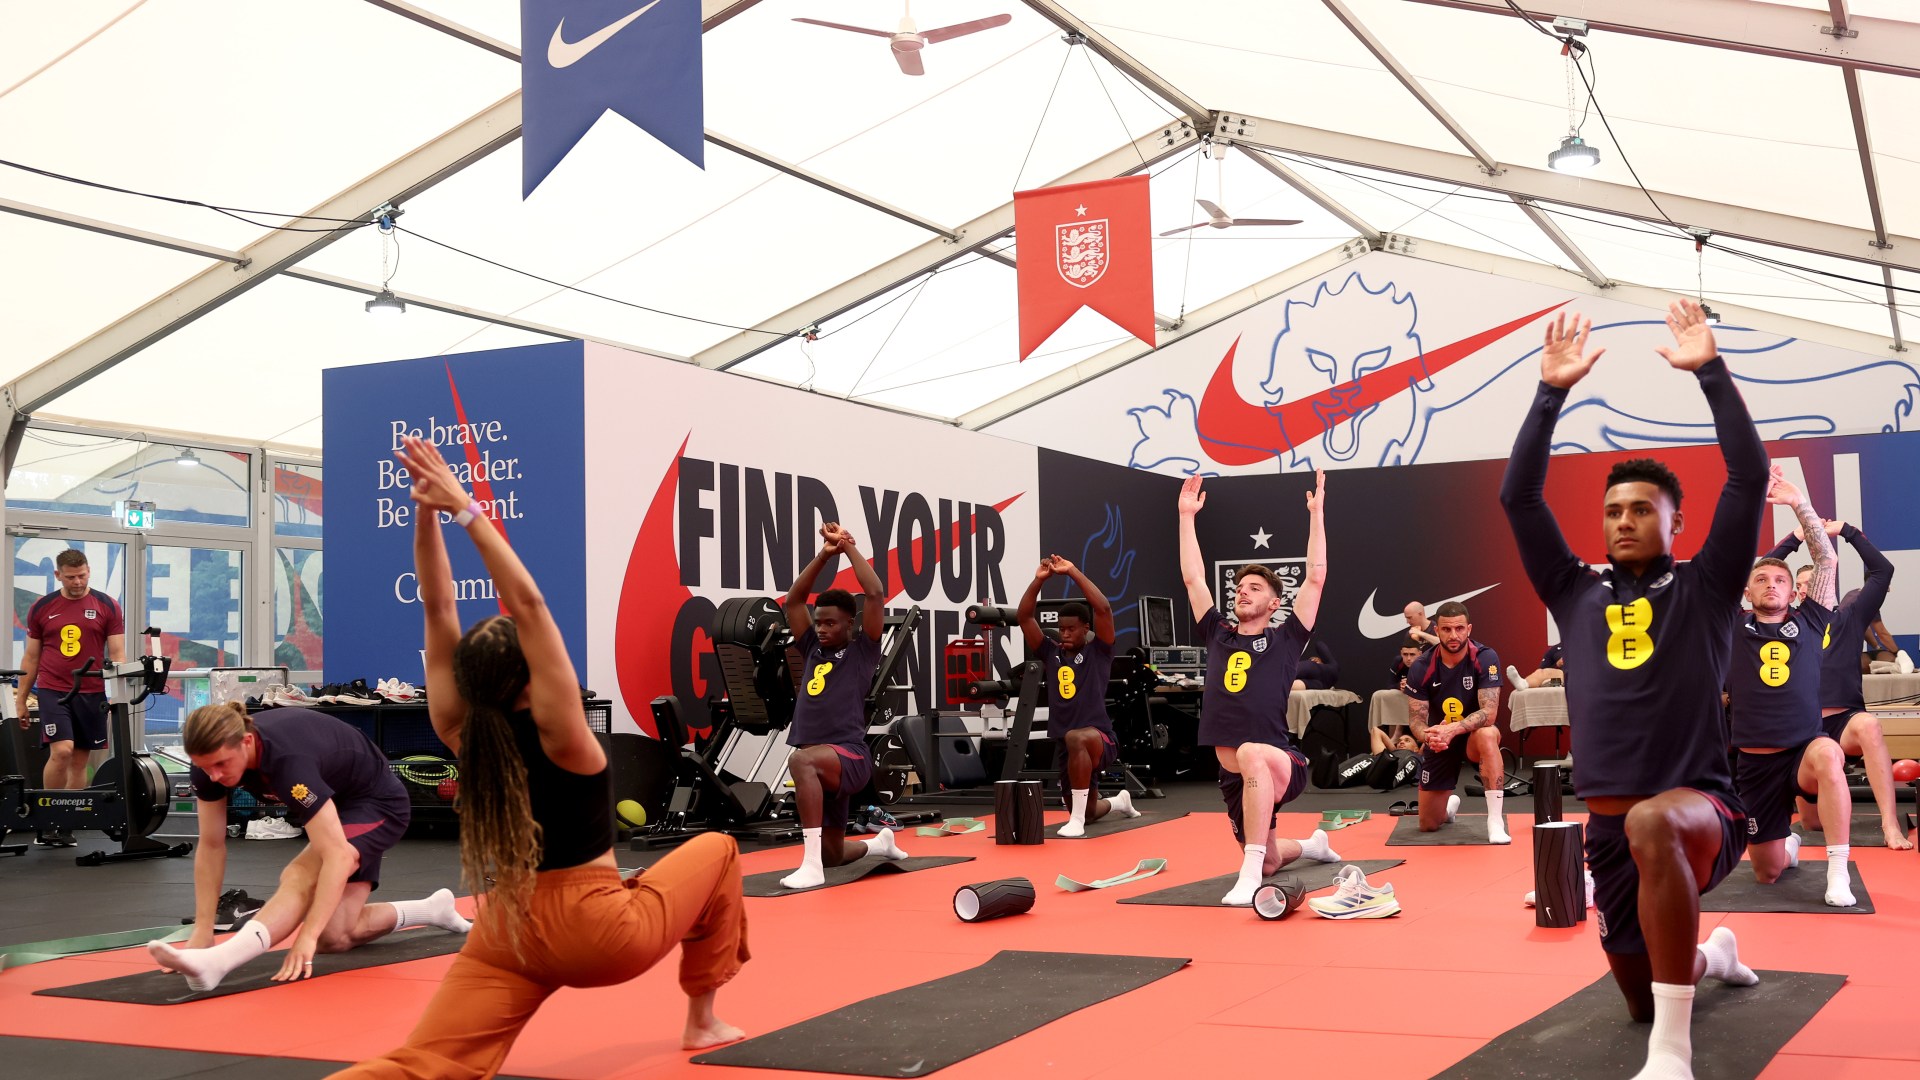 England stars hope for longer stretch at Euros  as they do yoga at five-star hotel  The Sun [Video]